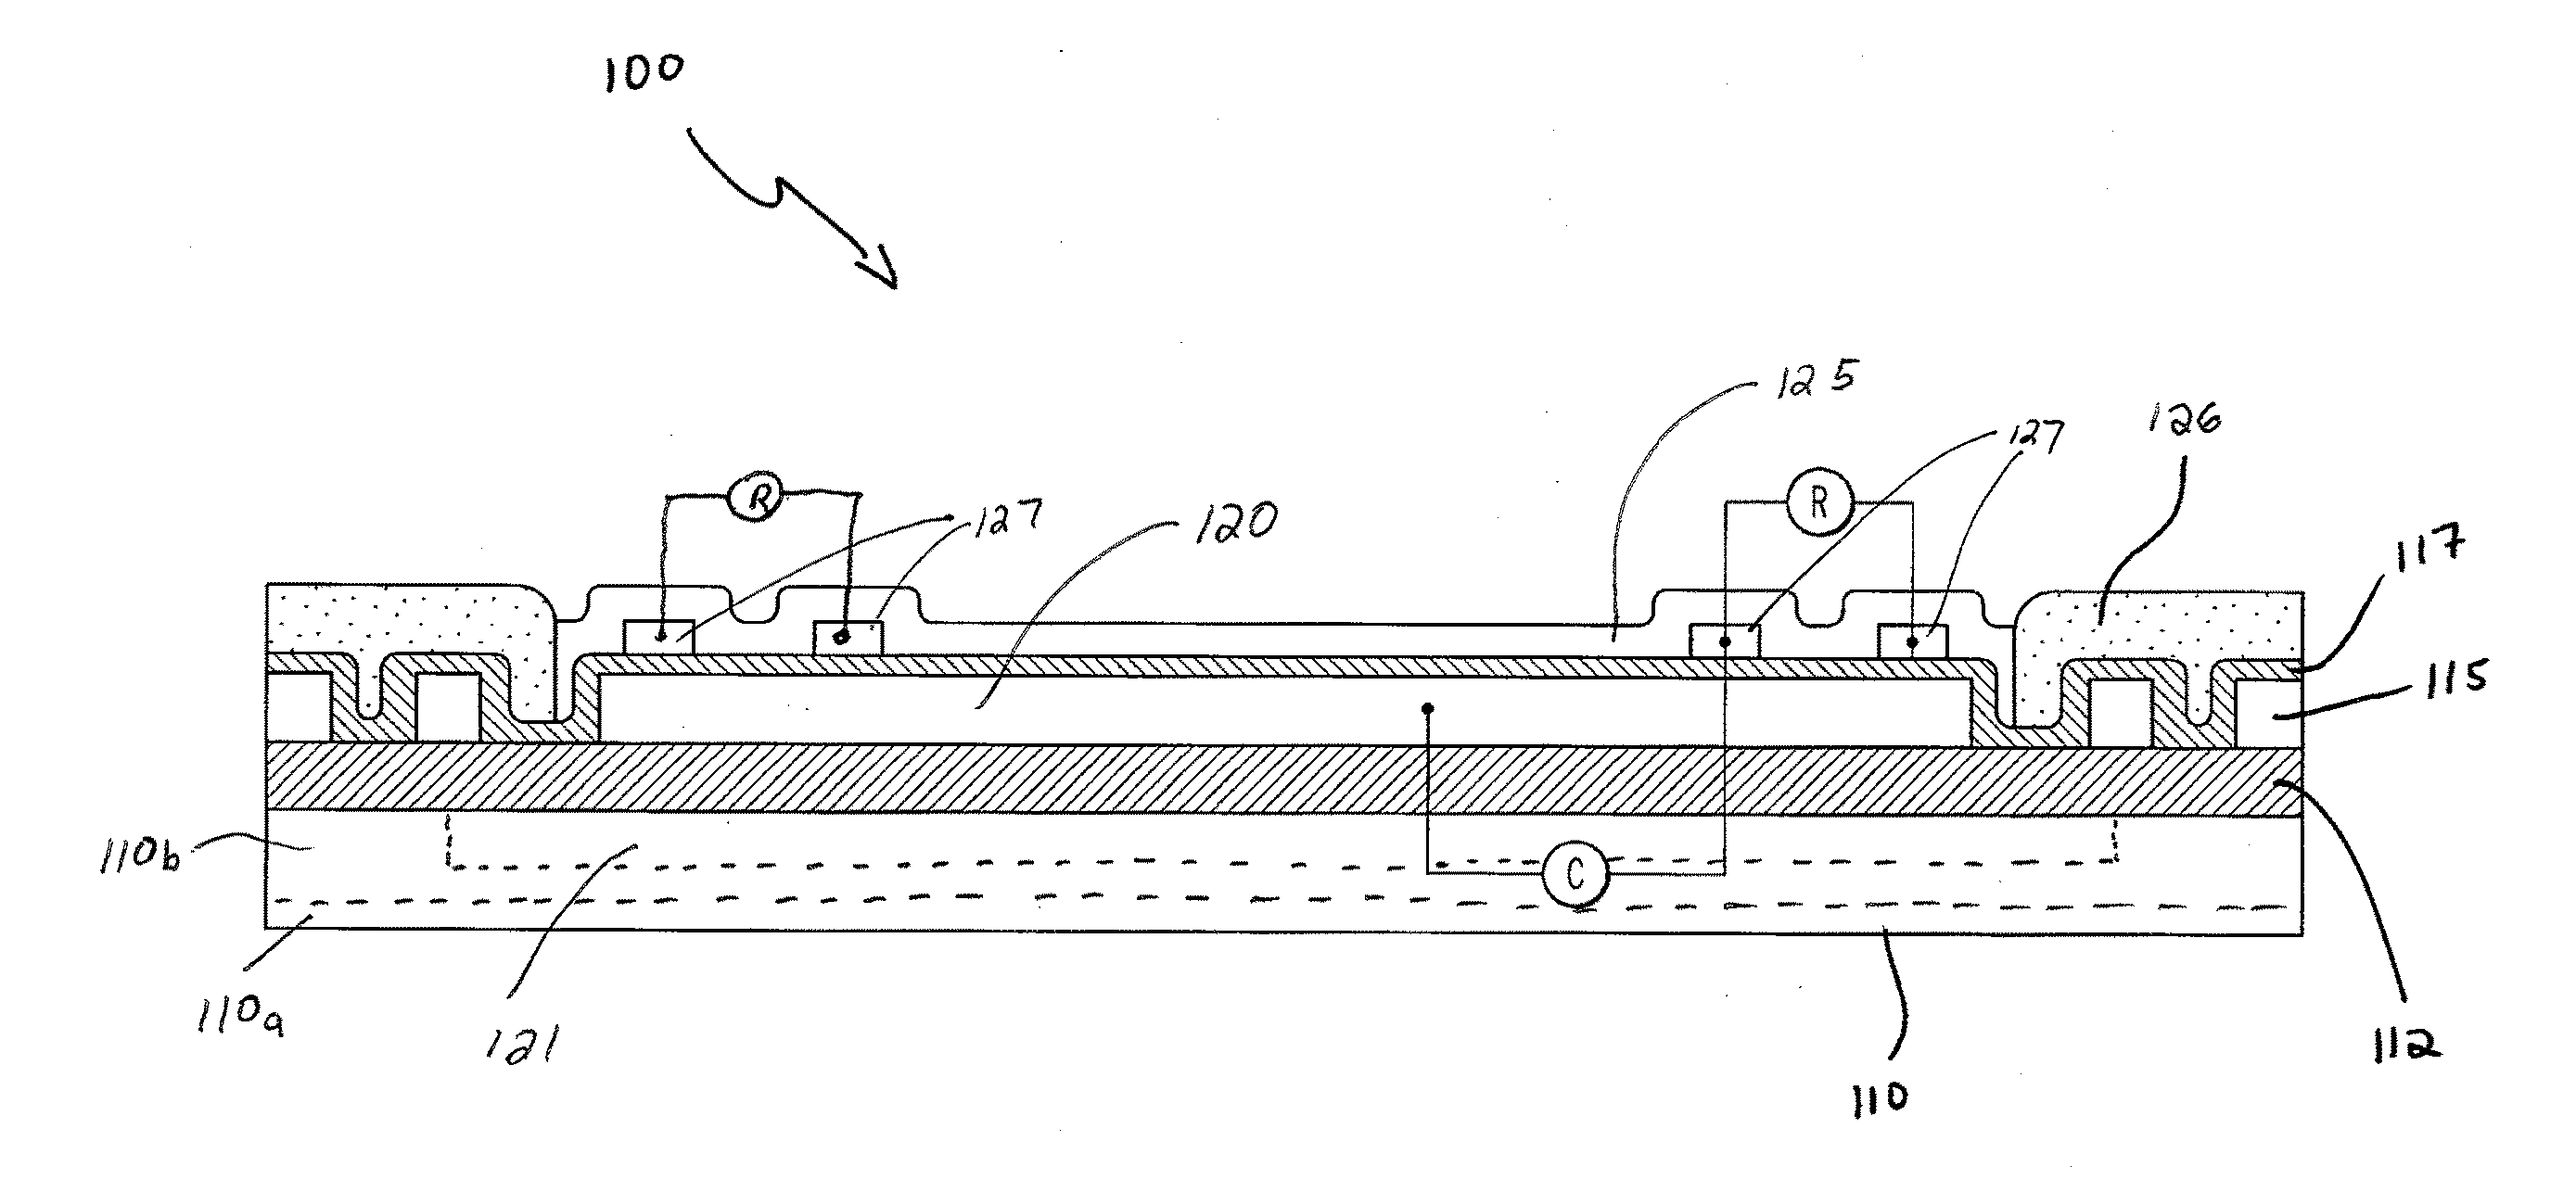 Apparatus and Method for Microfabricated Multi-Dimensional Sensors and Sensing Systems